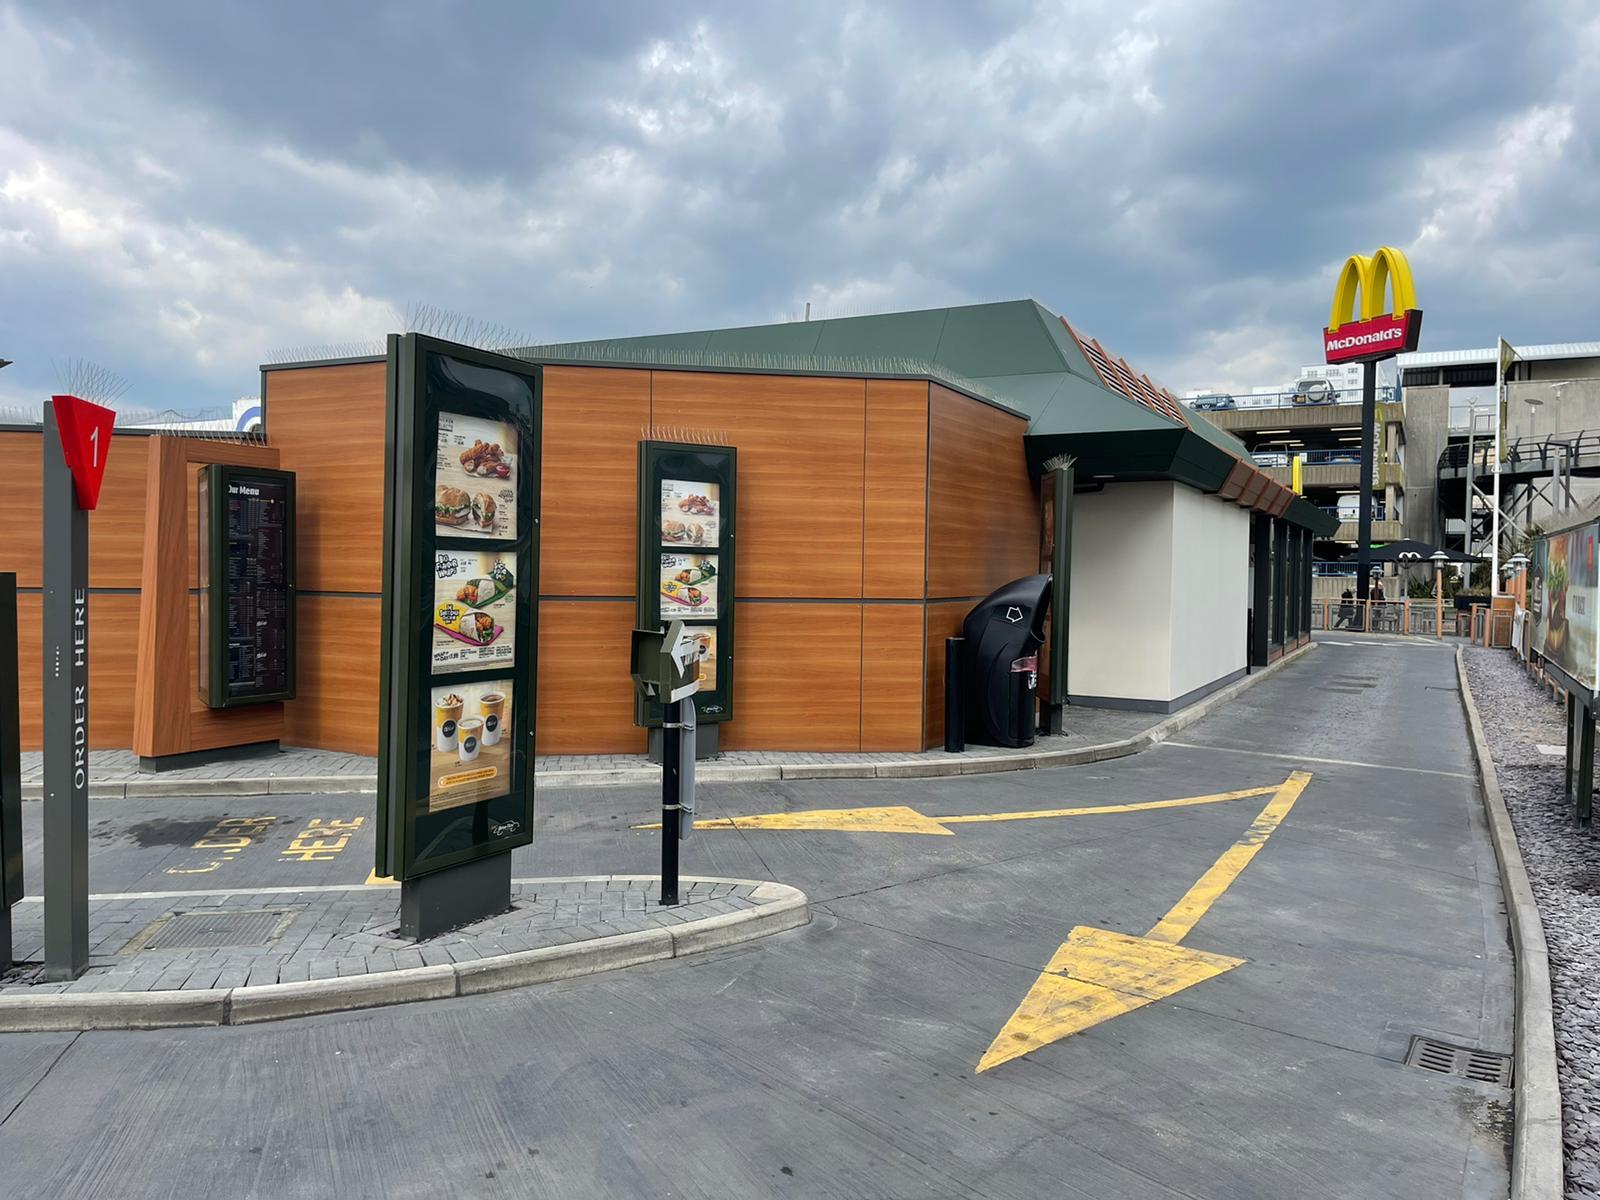 The McDonalds at Brighton Marina will be shut for the rest of the day following a police incident